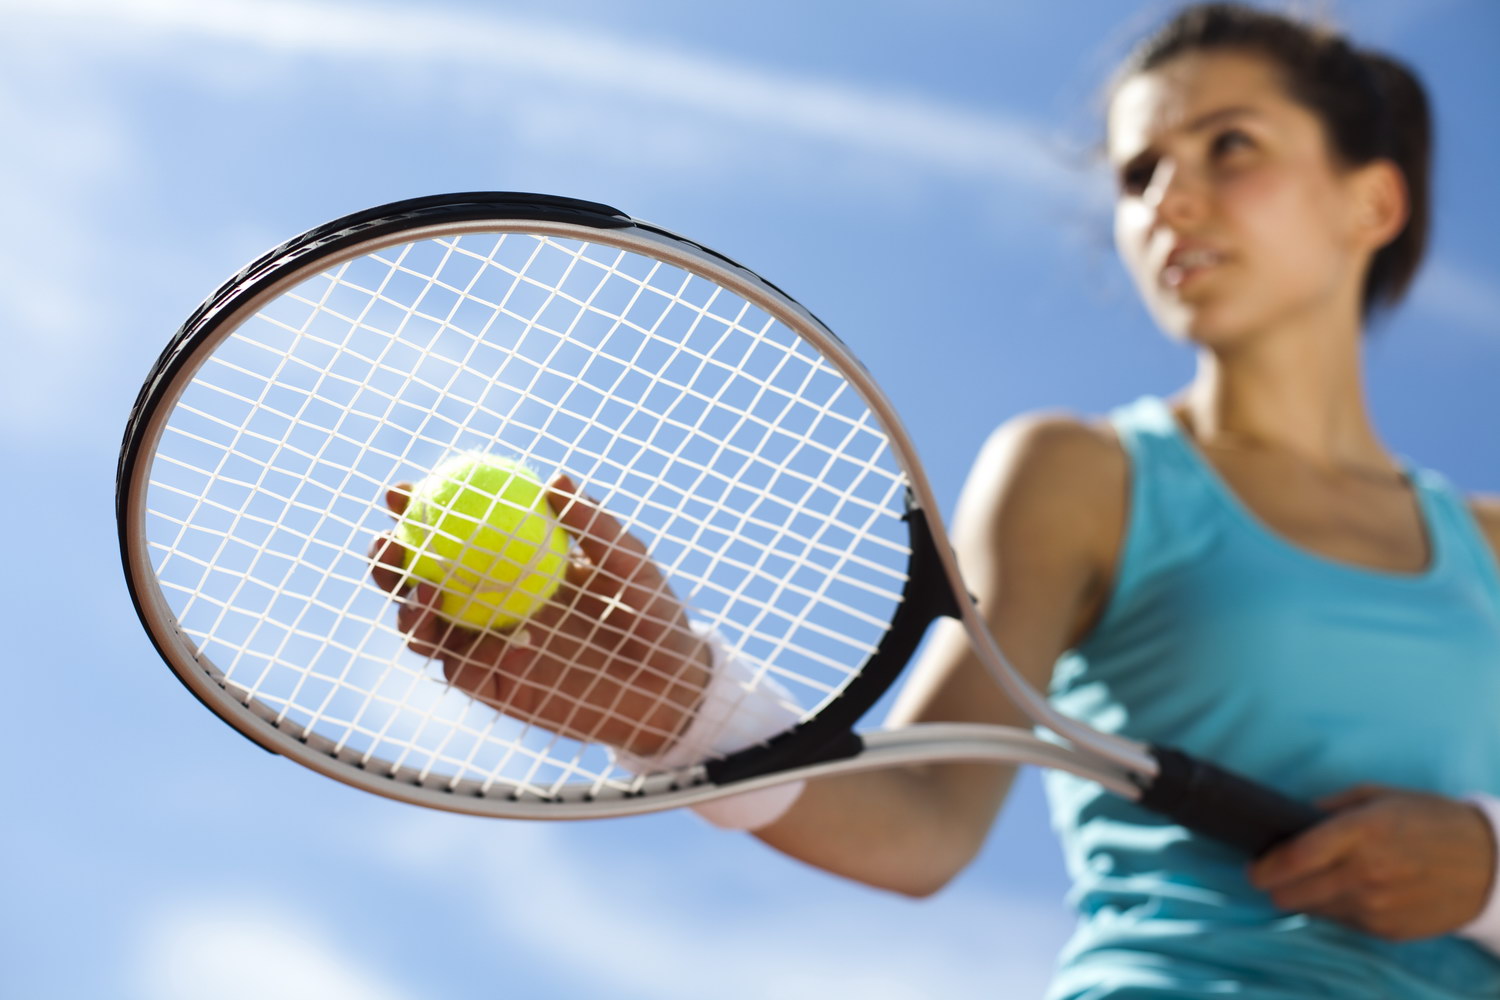 Best budget tennis racket for beginners to play tennis